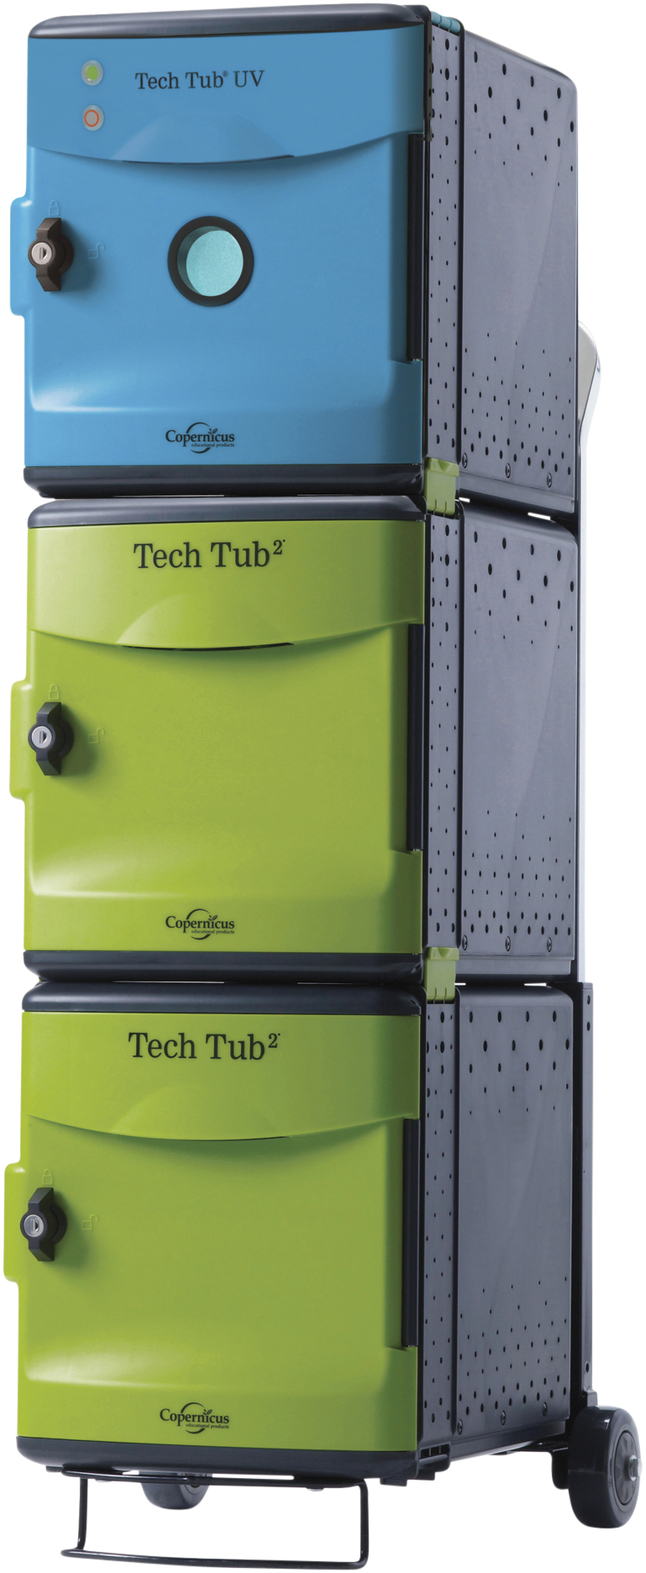 Copernicus Tech Tub2 Trolley UV Tub, Holds 10 Devices with USB, 14-3/4 x 19-1/2 x 35-3/4 Inches, Item Number 2040941